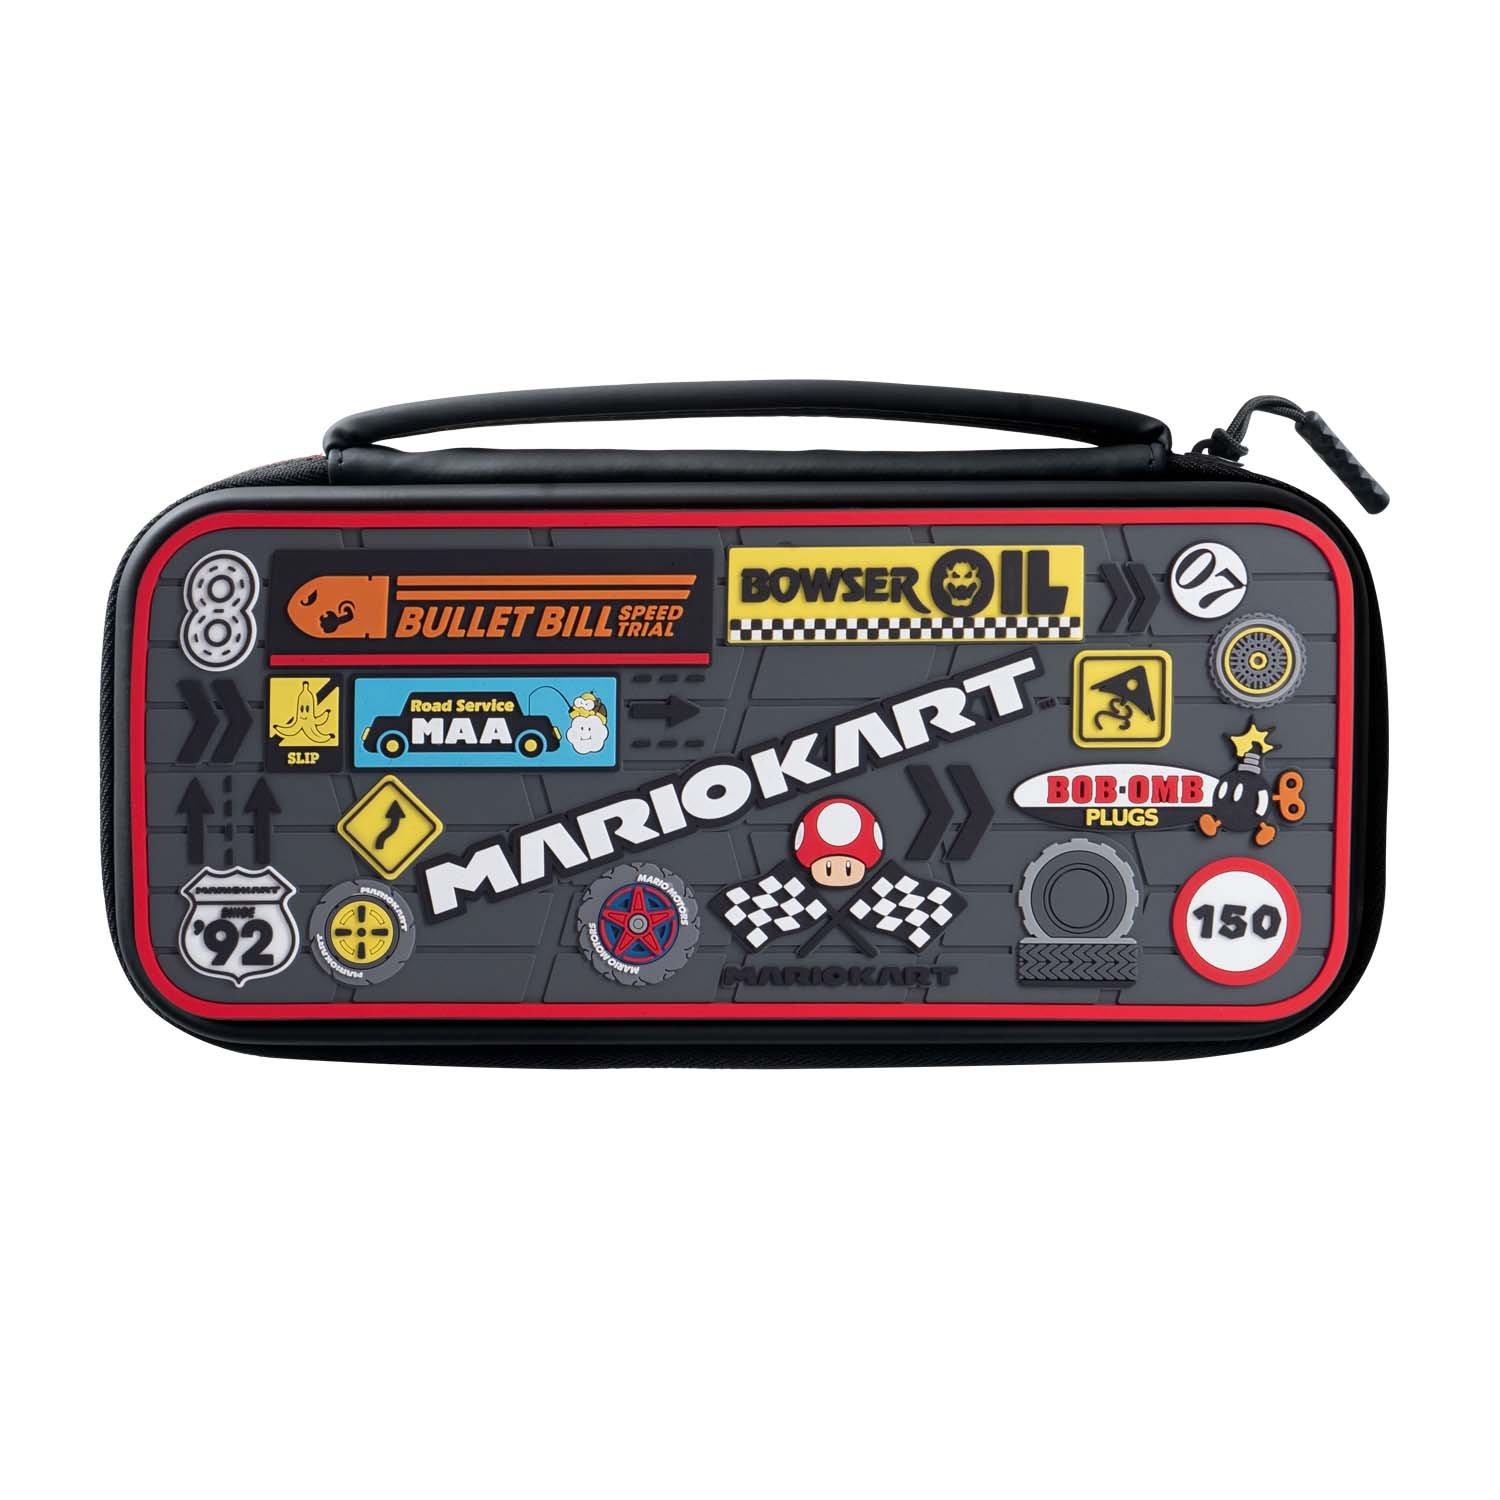 PDP Console Travel Case for Nintendo Switch - Mario Kart Adverts | GameStop